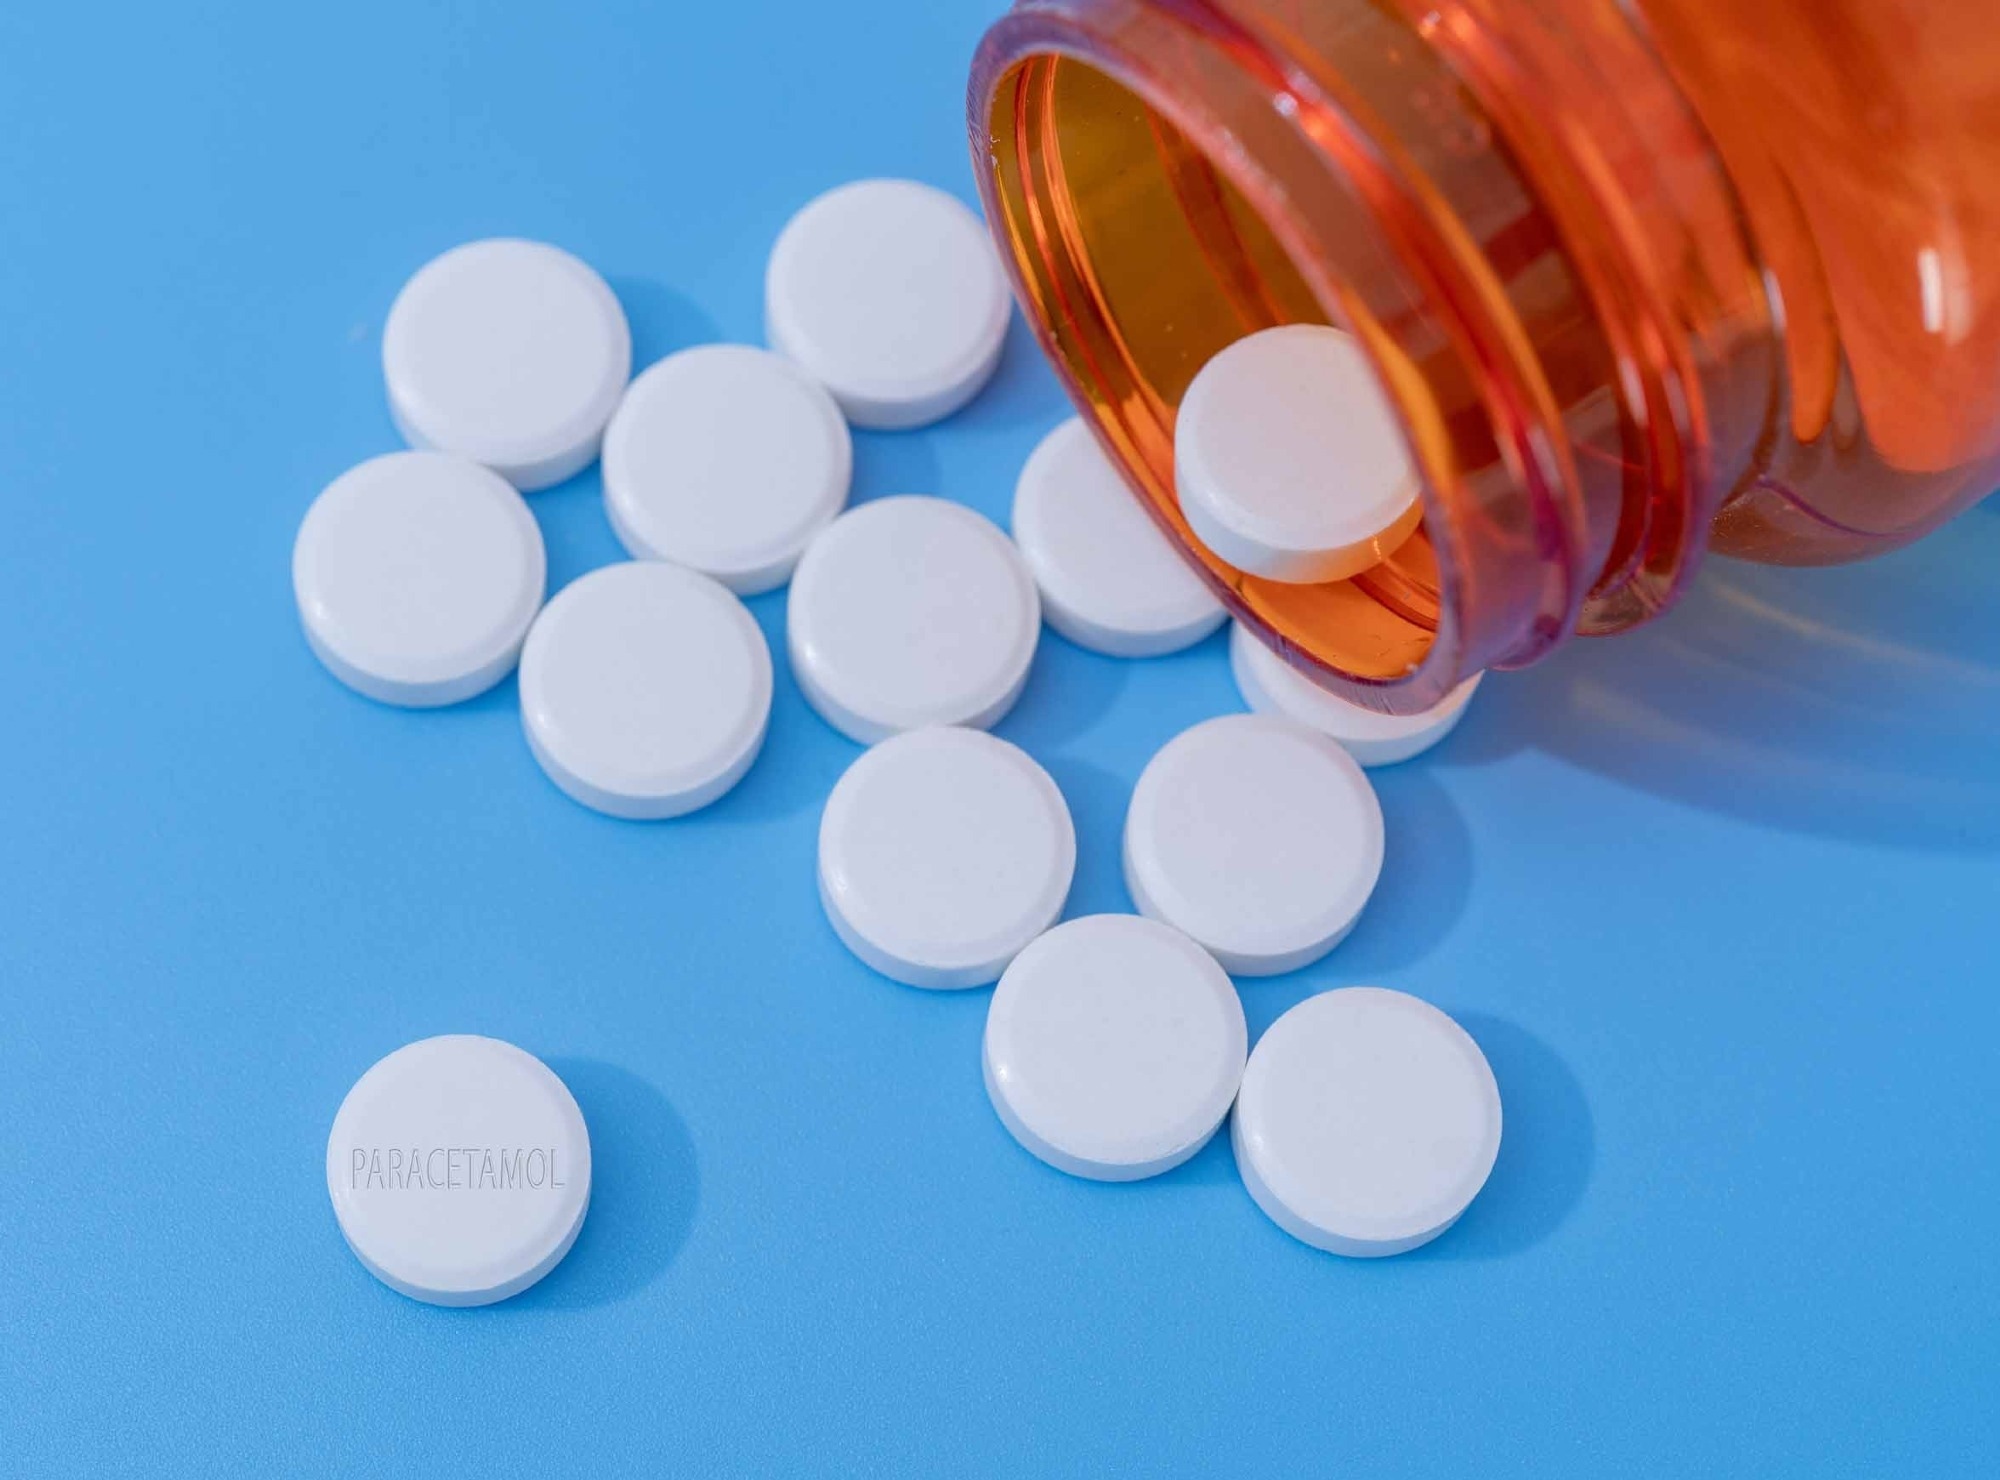 Study: Acetaminophen Use During Pregnancy and Children’s Risk of Autism, ADHD, and Intellectual Disability. Image Credit: luchschenF / Shutterstock